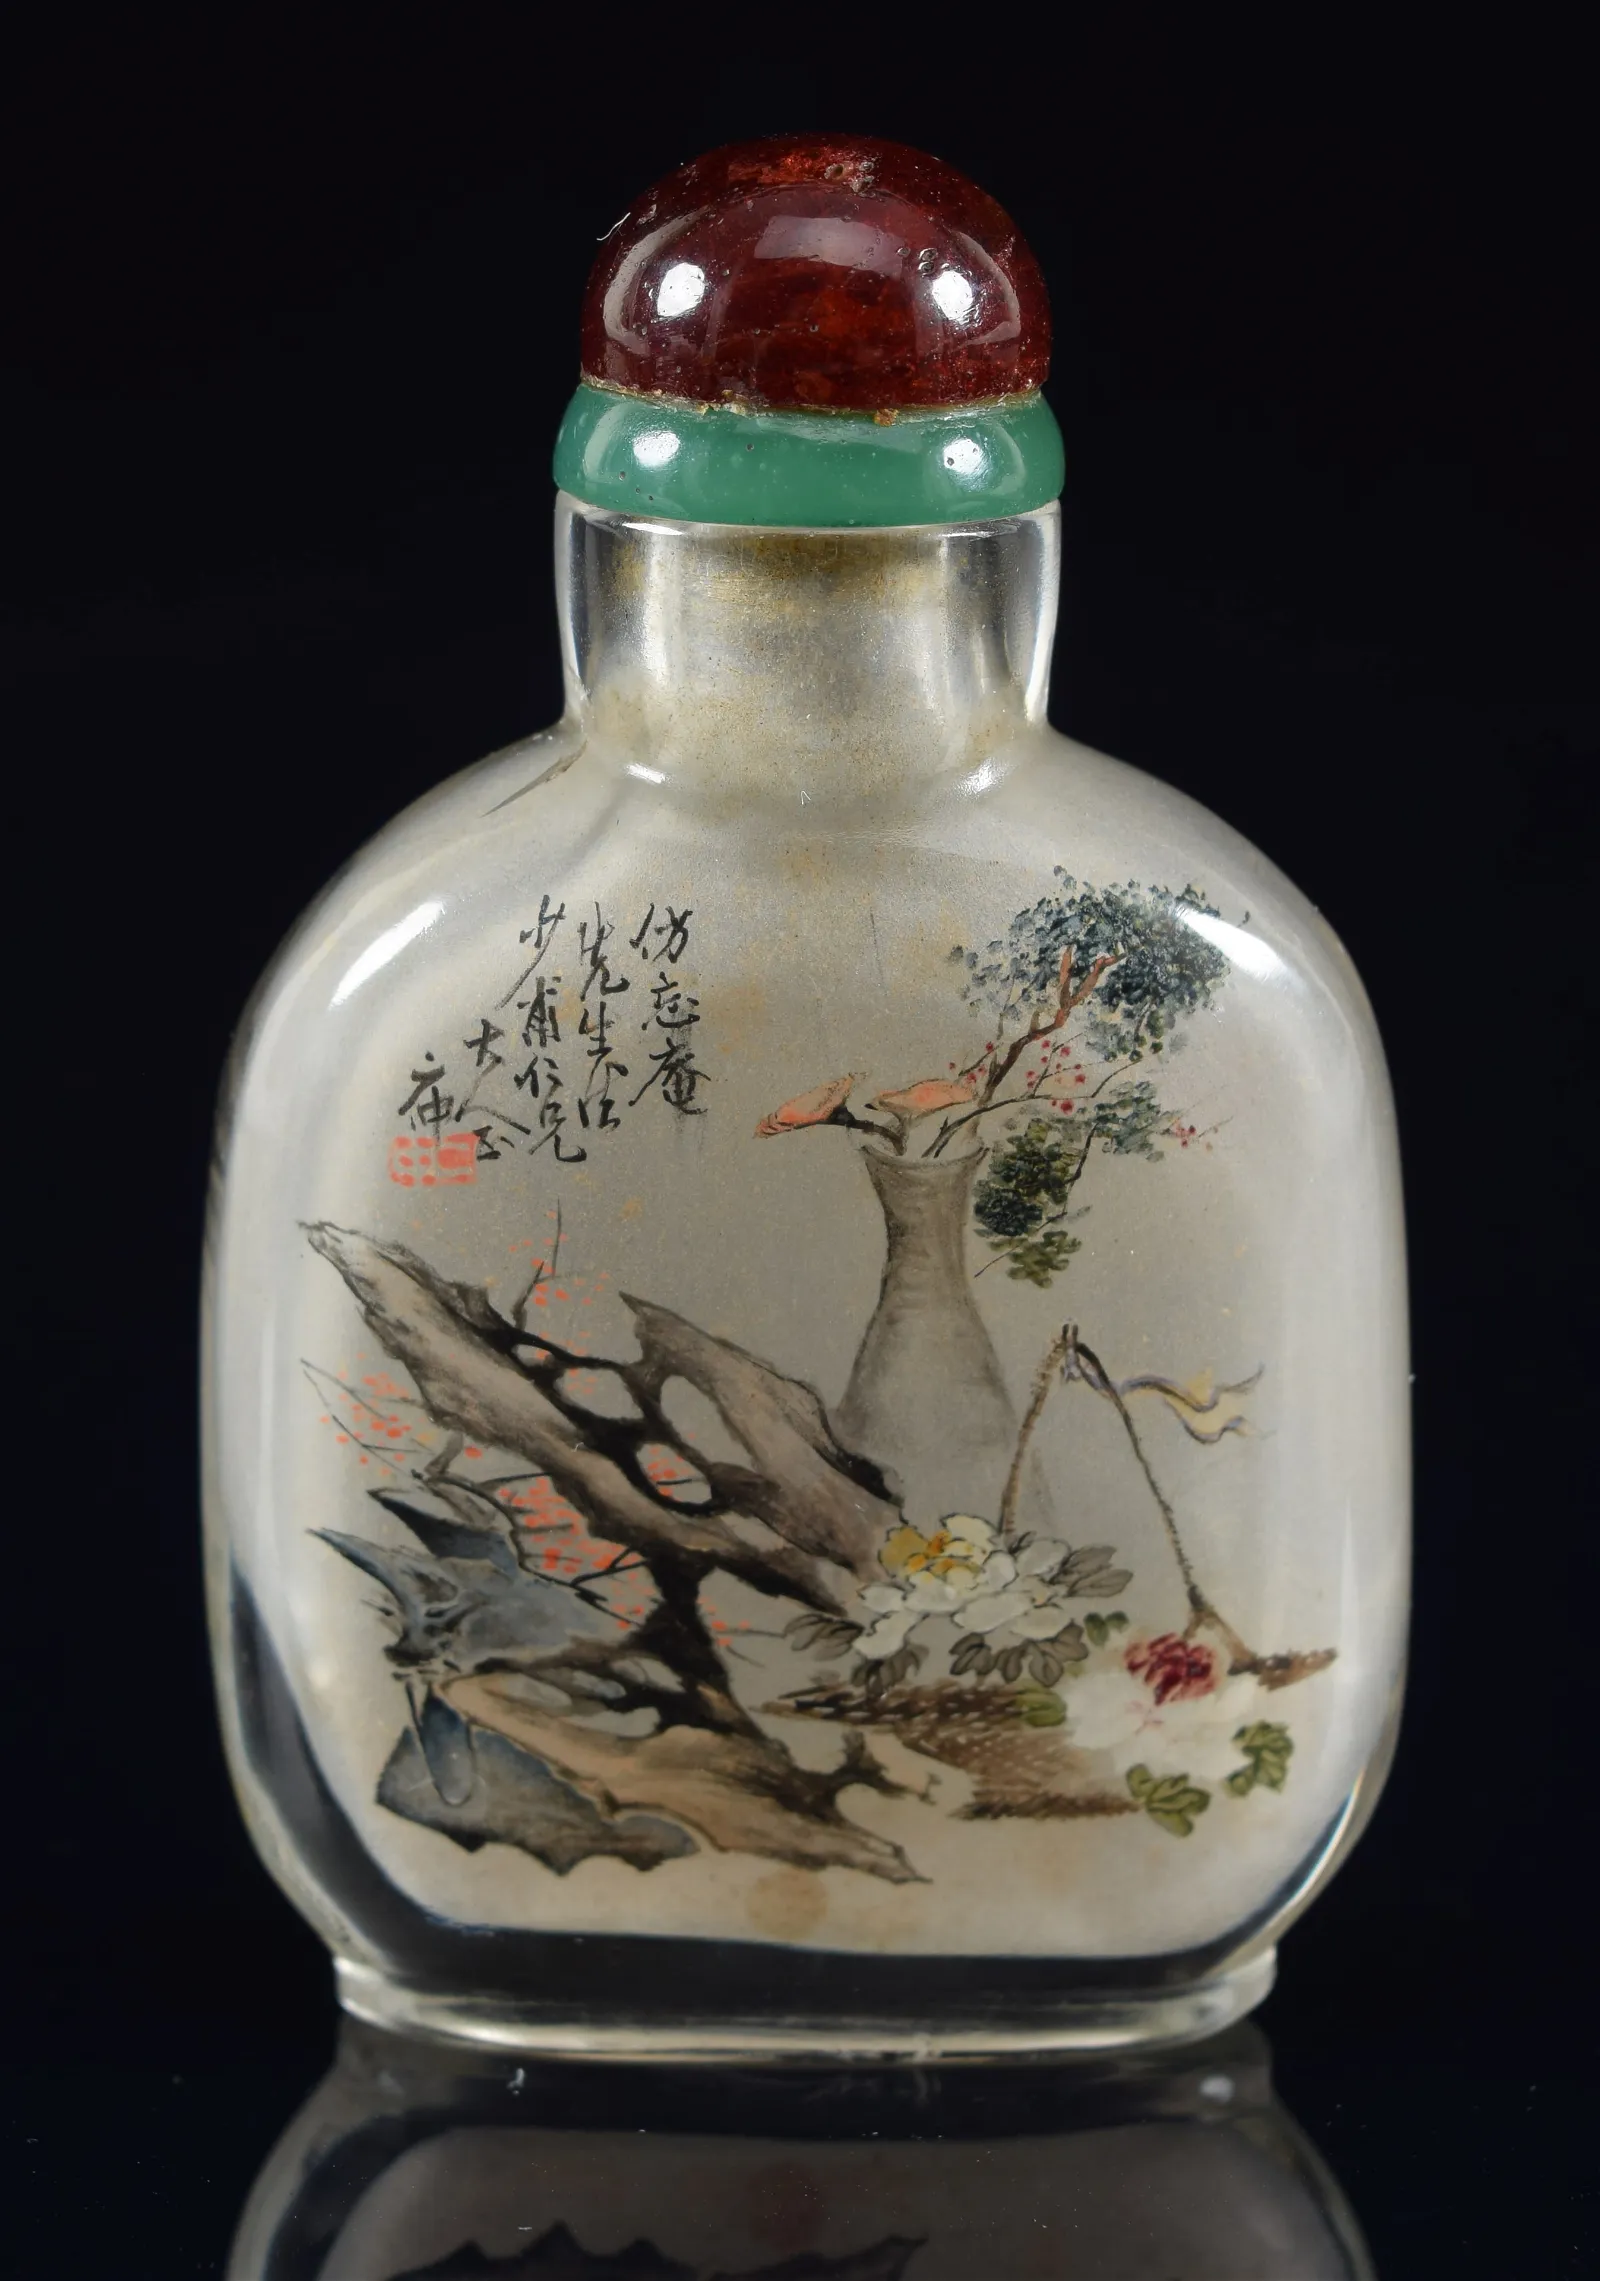 Late Qing interior-painted snuff bottle signed for Ding Erzhong (1865-1935), $11,000 at Tremont Auctions.